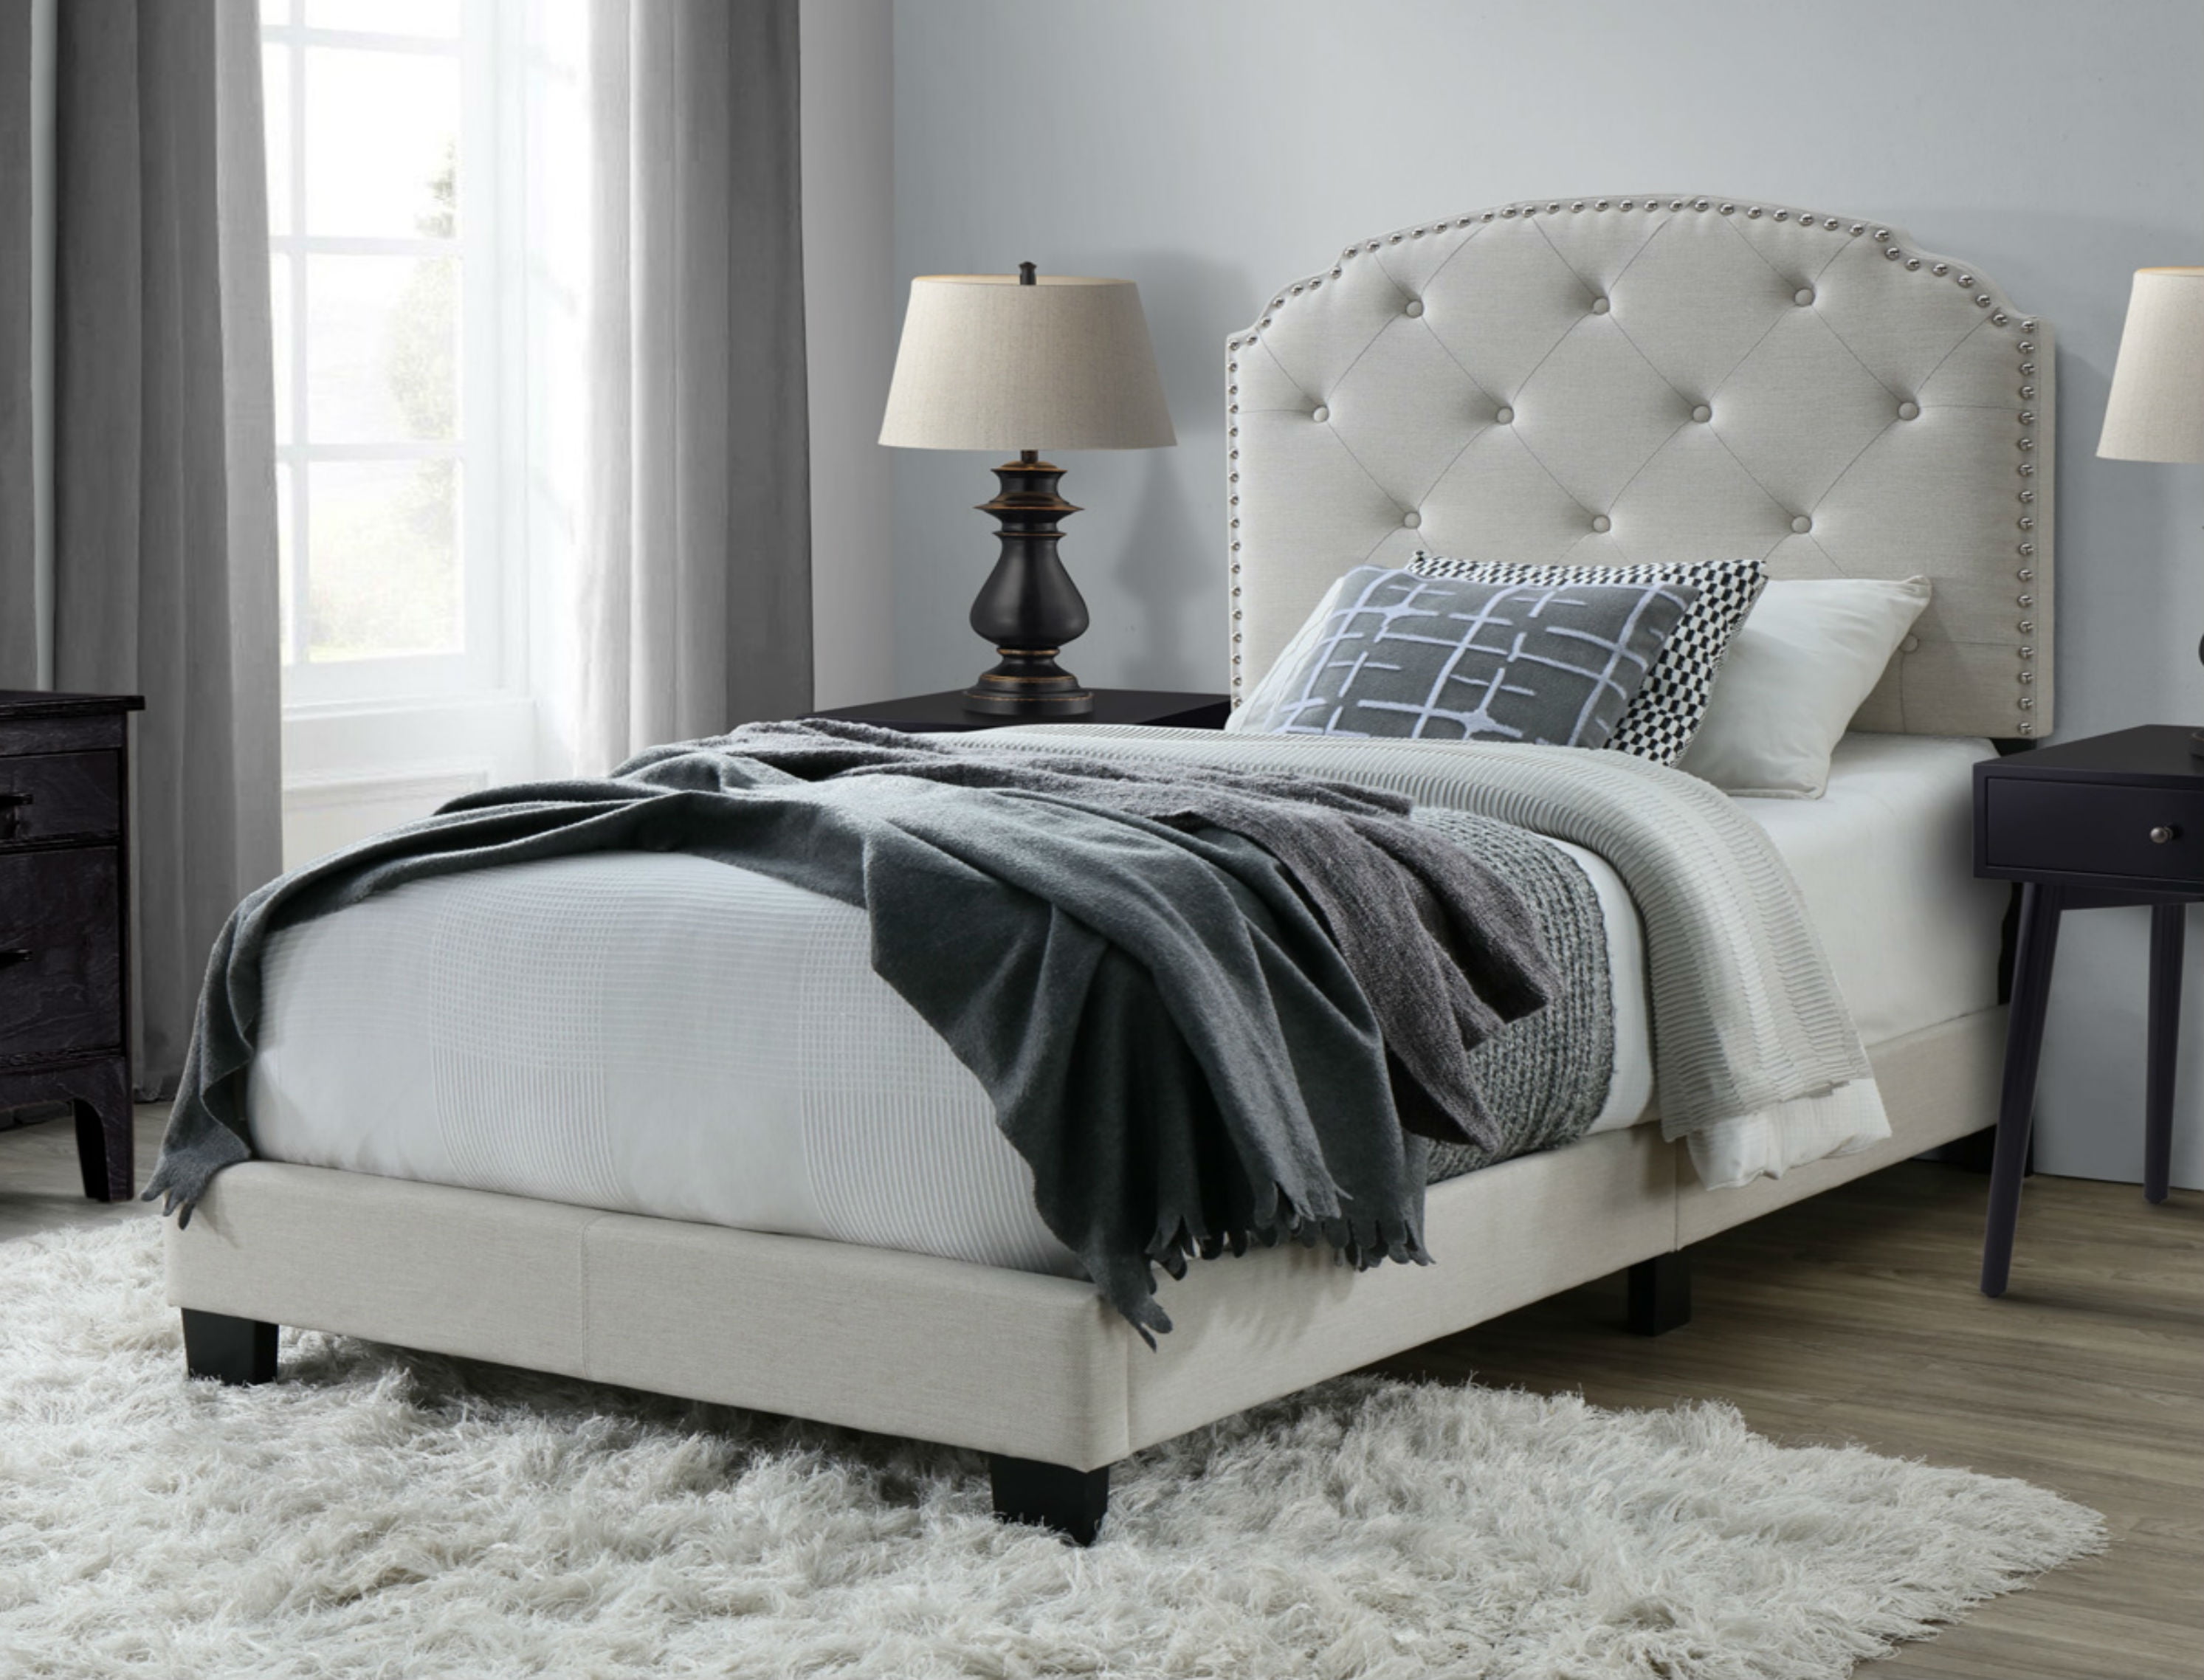 Twin Tufted Bed Frame Clean Lines A Straightforward Profile And